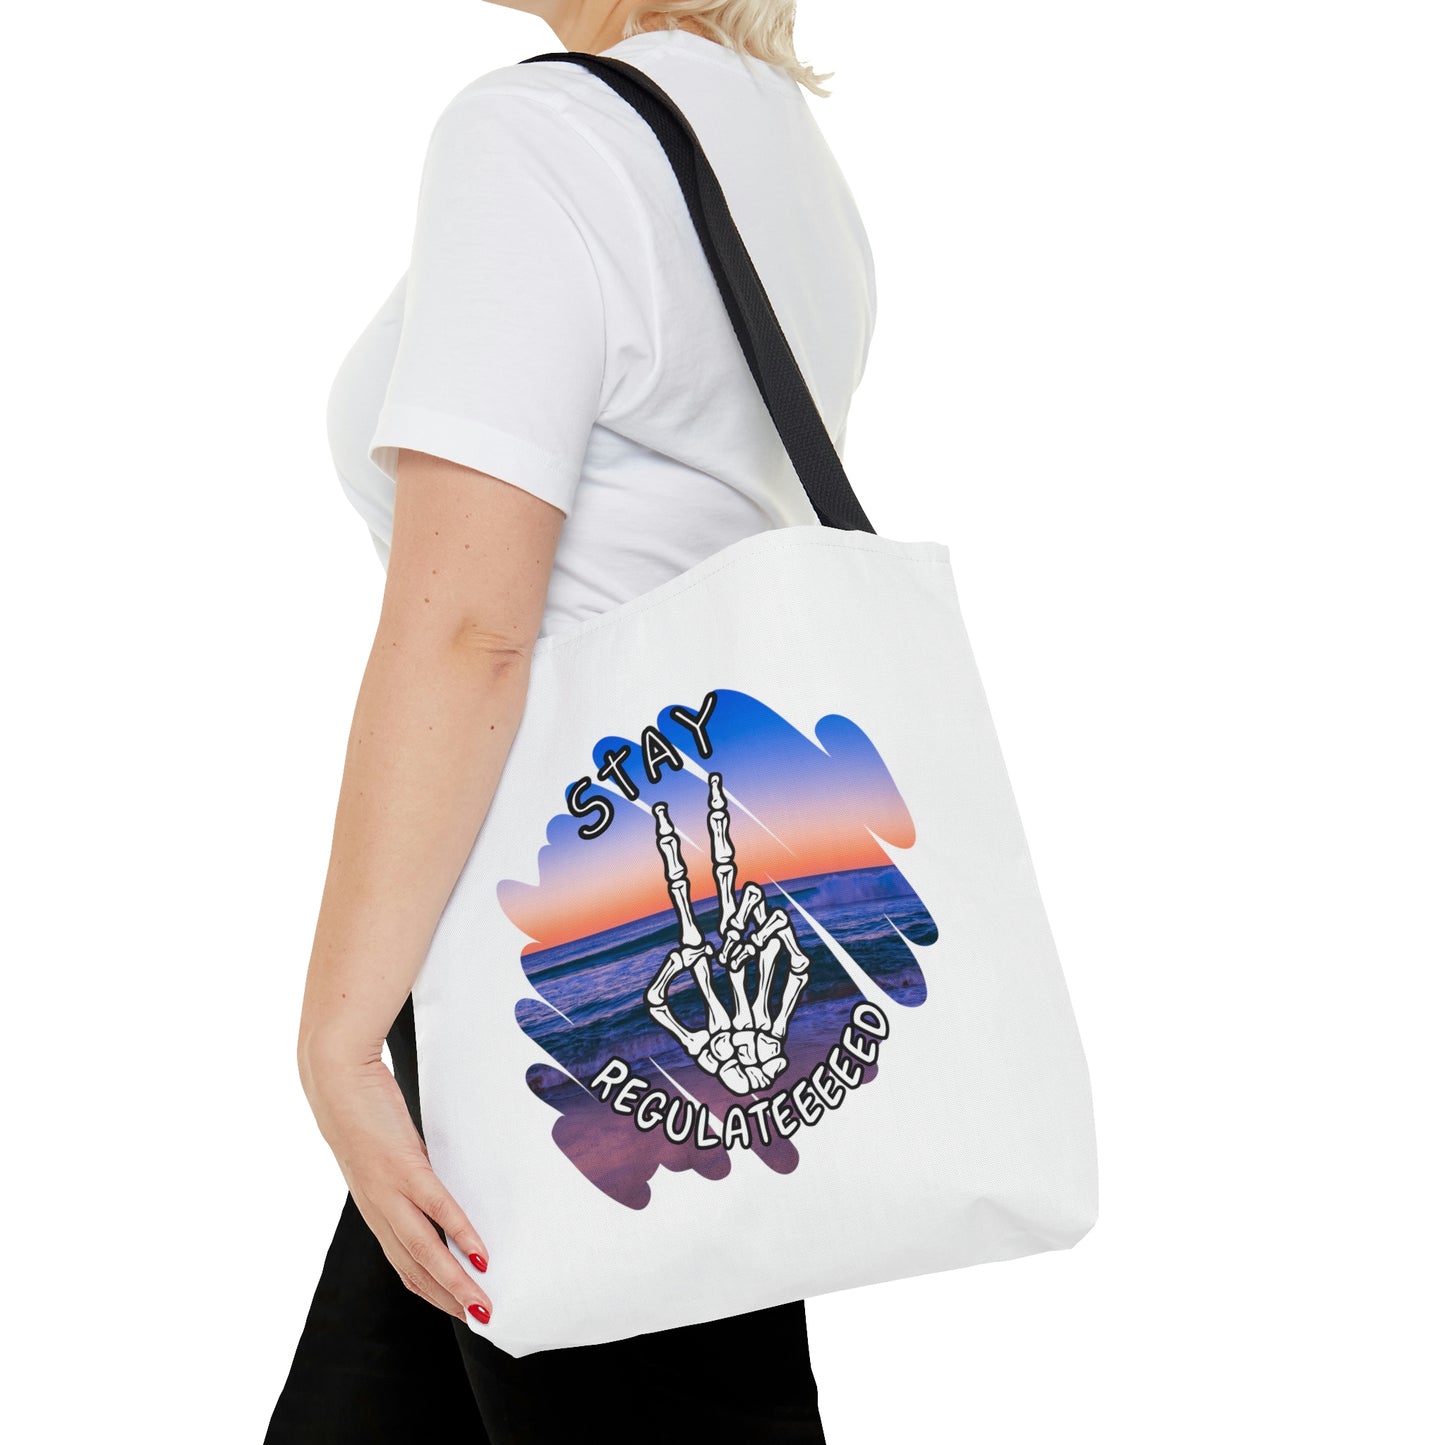 Stay Regulated [Gauthism Line] Tote Bag in 3 sizes